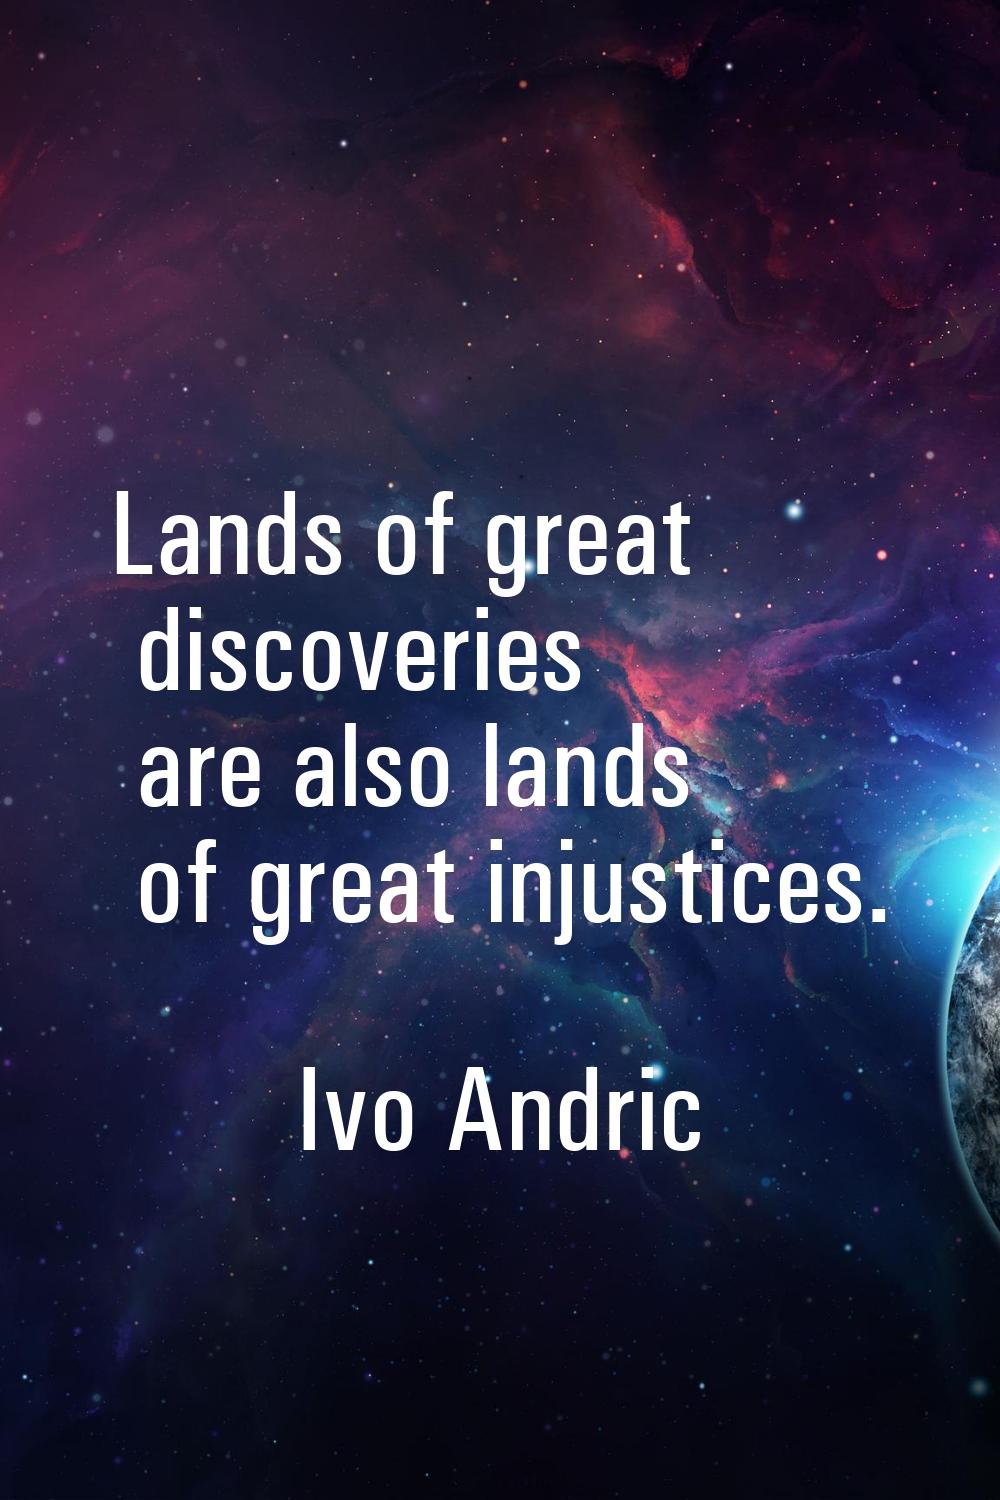 Lands of great discoveries are also lands of great injustices.